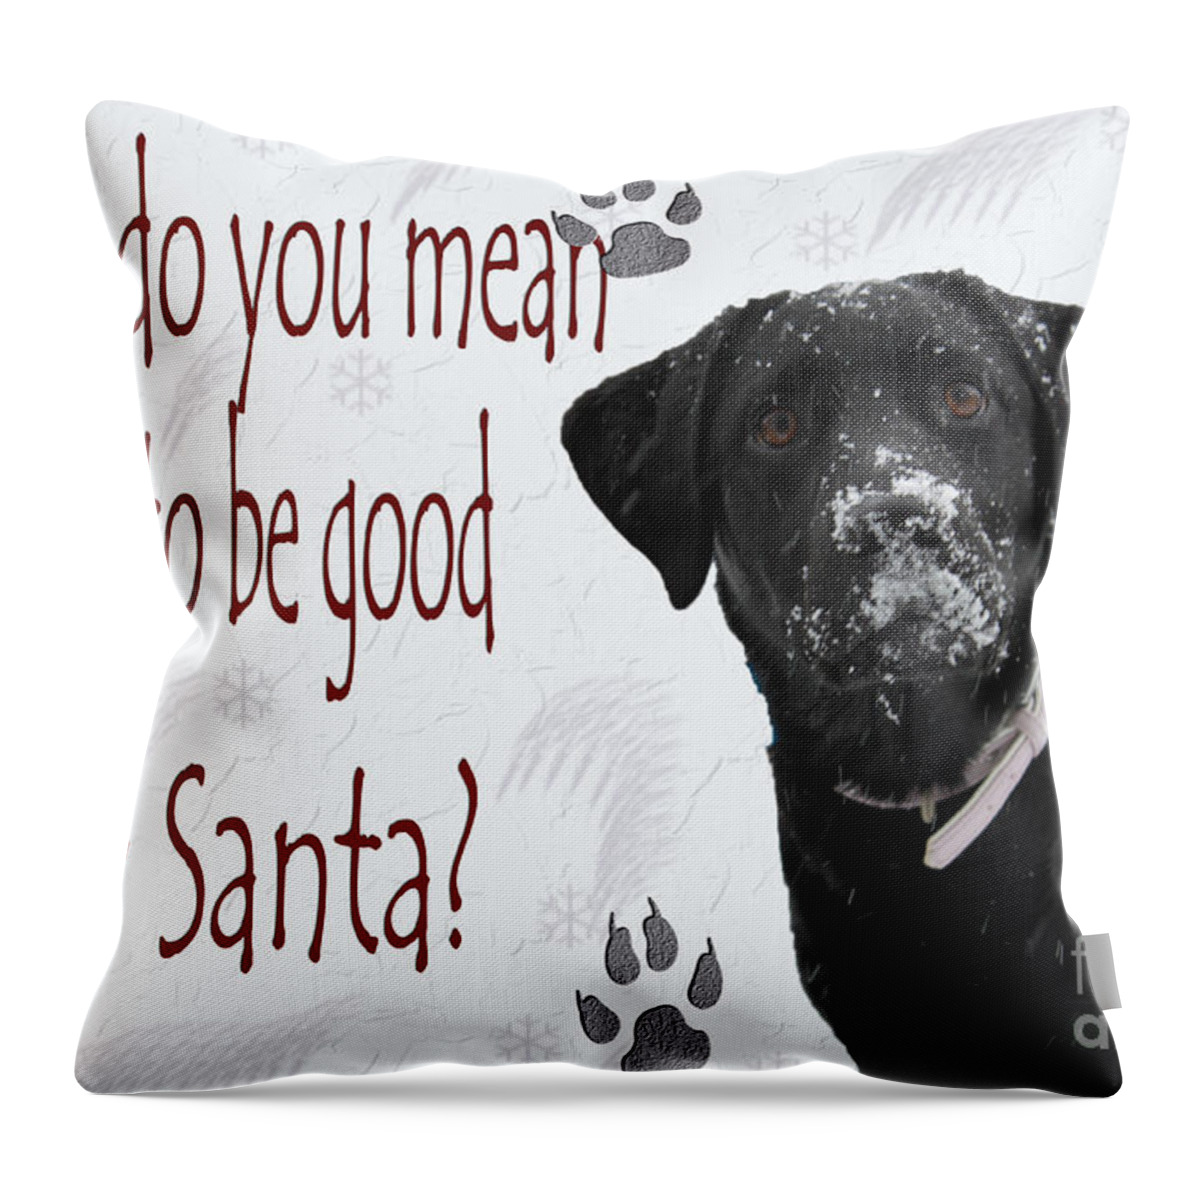 Cathy Beharriell Throw Pillow featuring the photograph Good For Santa by Cathy Beharriell